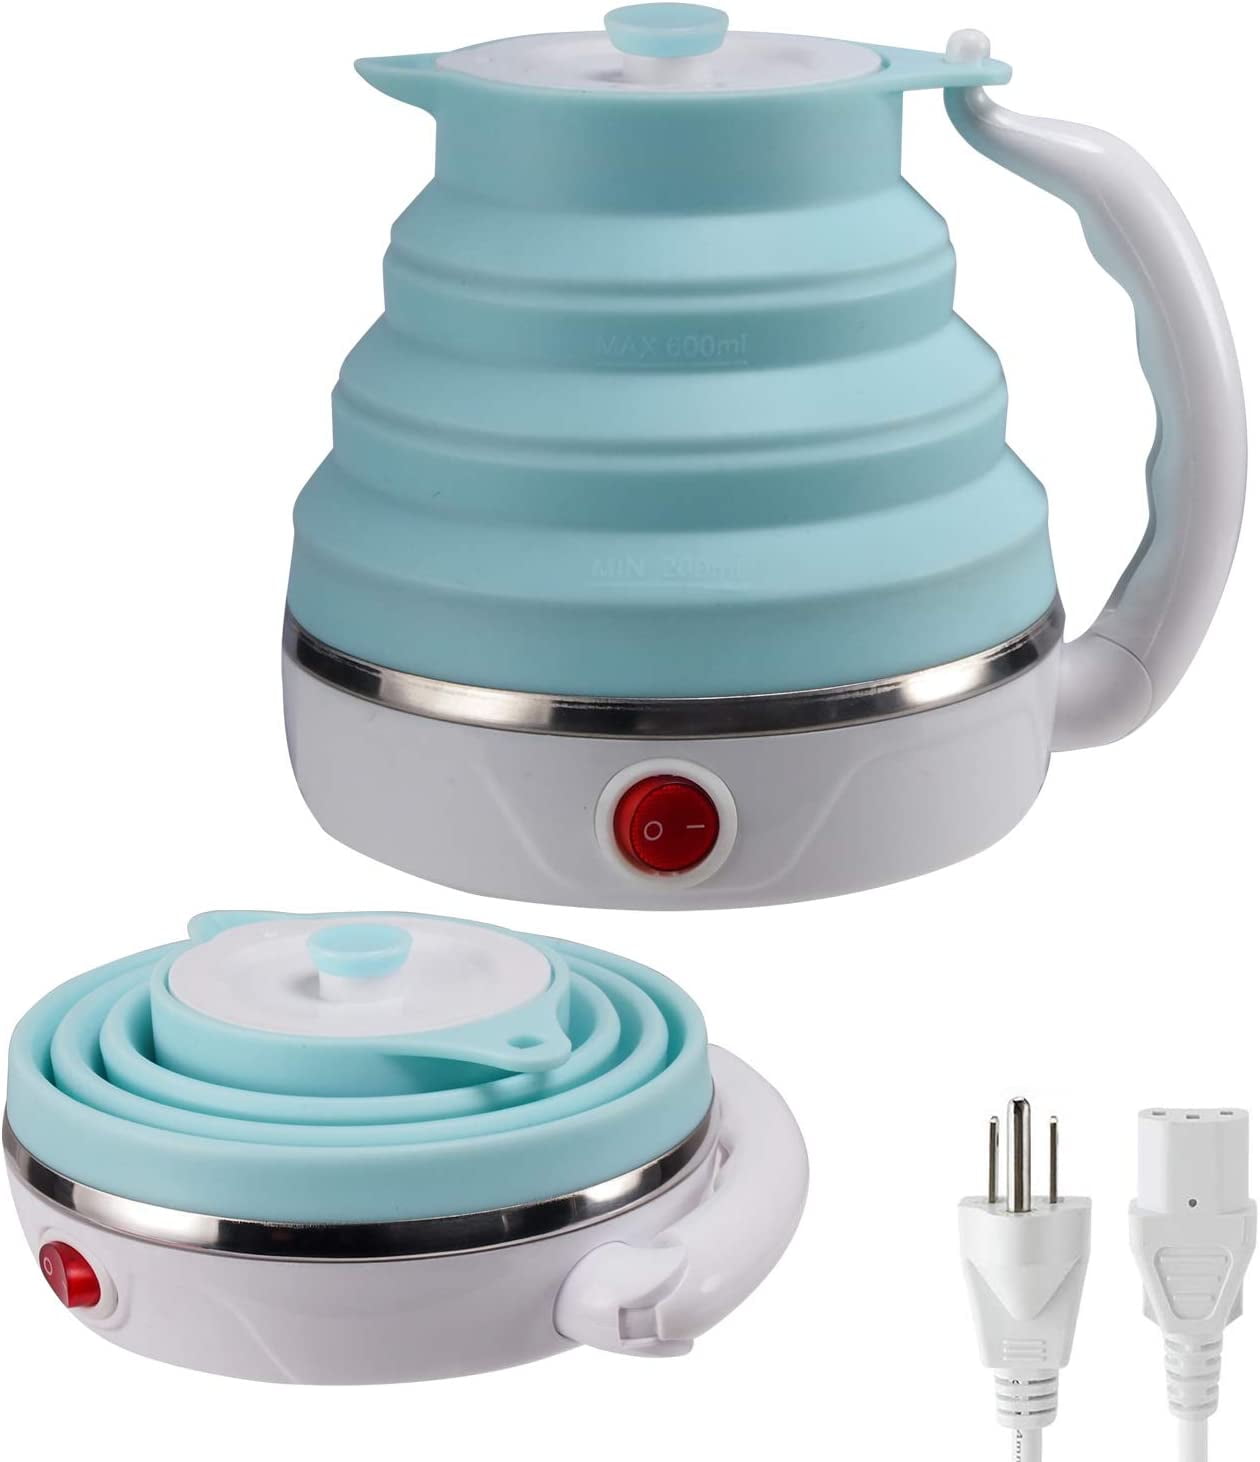 Dropship Foldable Electric Kettle, Camping Kettle, Mini Travel Kettle,  Silicone Electric Water Boiler, Tea, Coffee Kettle, Collapsible Kettle With  Separable Power Cord For Outdoor Hiking Camping---Blue to Sell Online at a  Lower